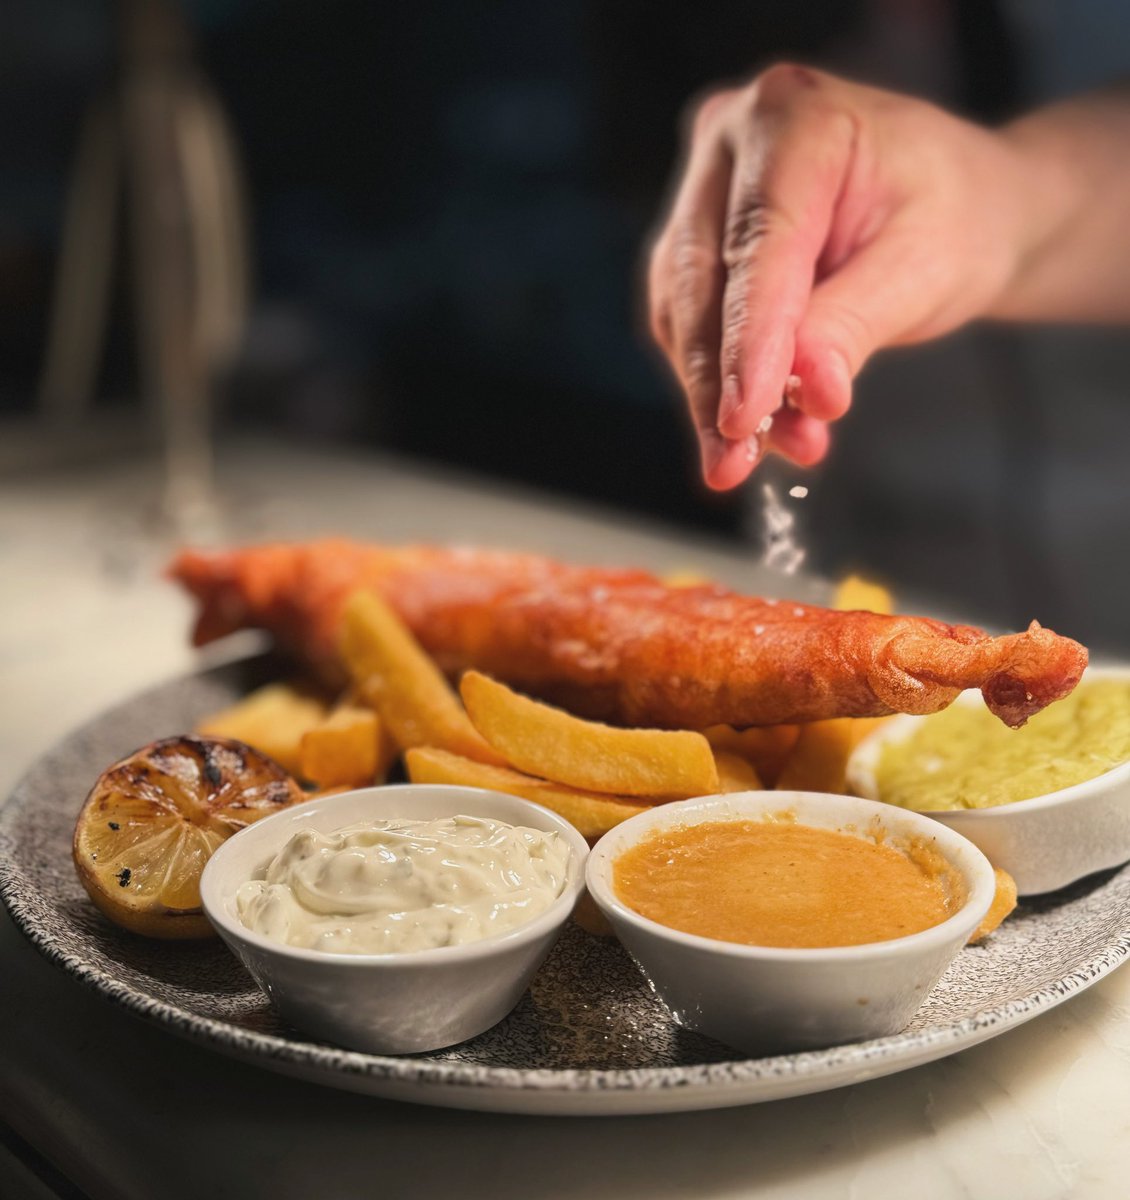 Our Classic Beer Battered Fish & Chips is Now Aspall Cyder Battered!   It will certainly hit the spot! 🐟🍽️

Followed by: tartare, marrow fat peas & Curry sauce! 

Come in and try it now, you’ll love it! 

#newmenu #youngschefsacademy #youngspublife #fishandchips #curry